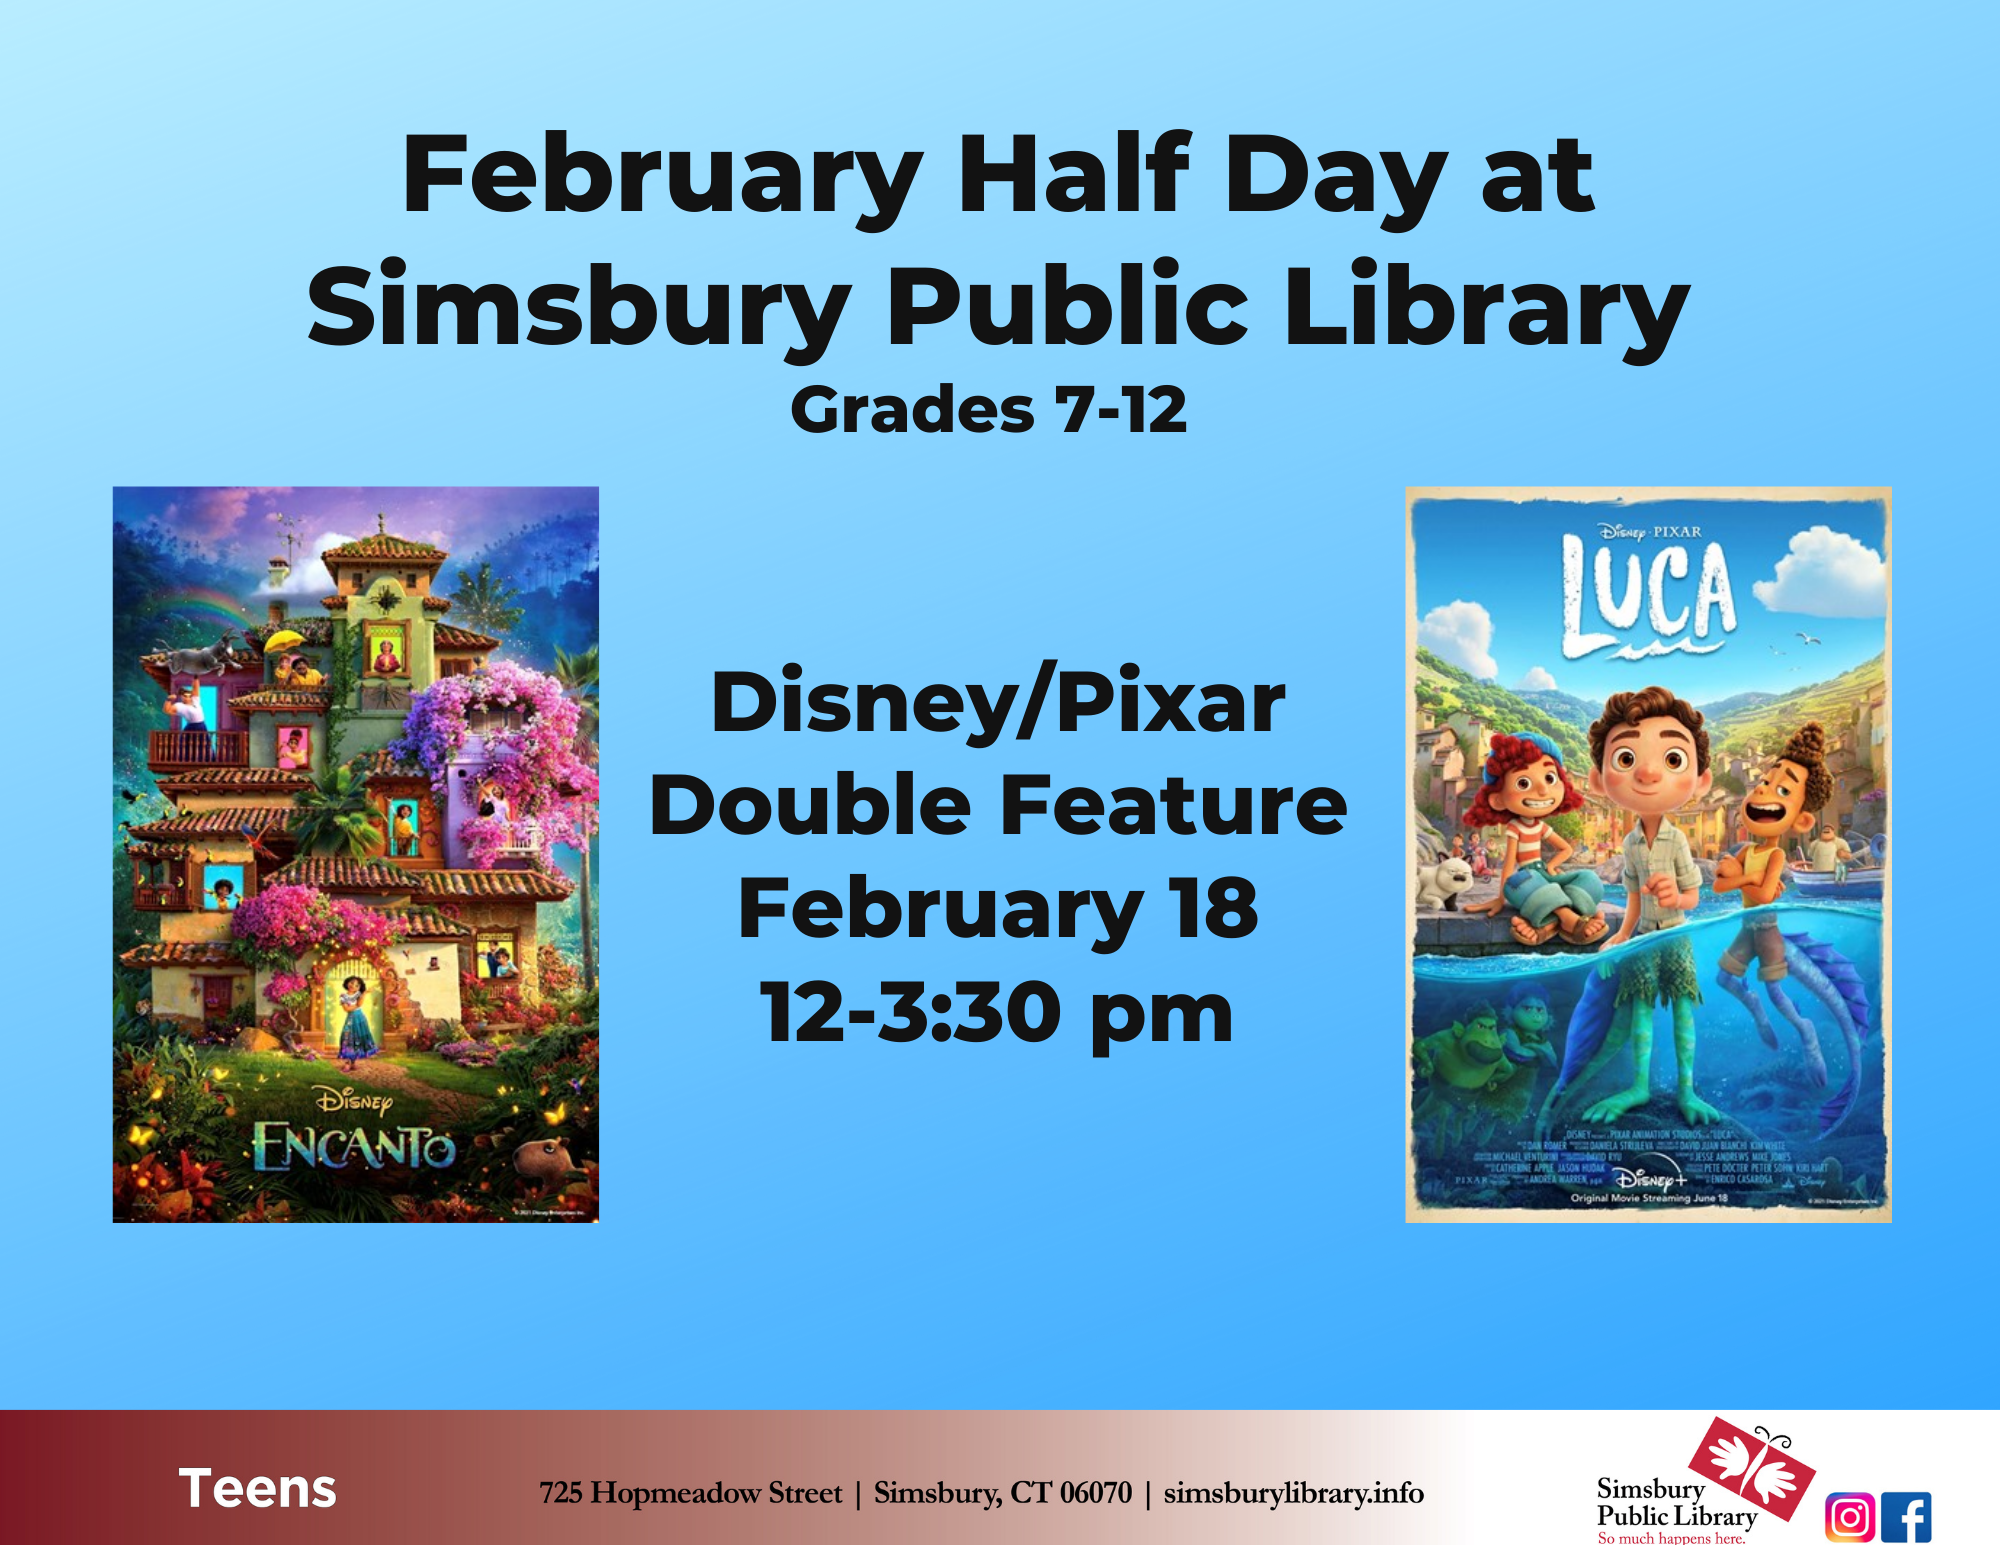 February Half Day Double Feature